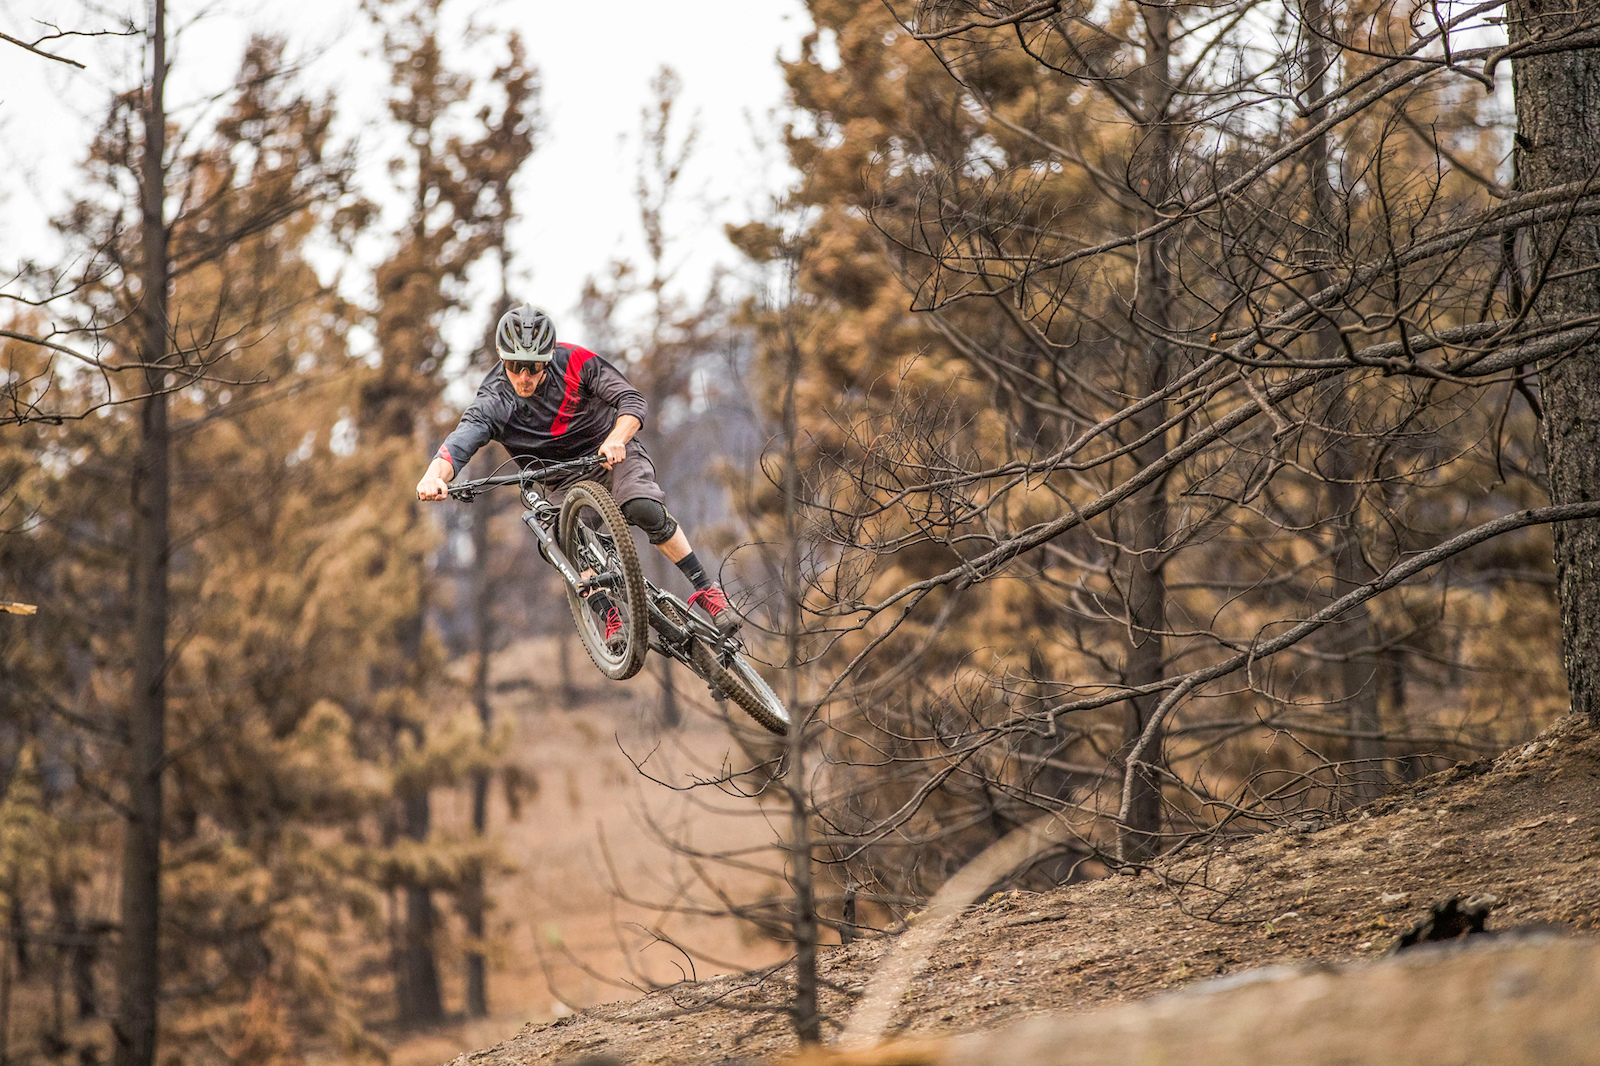 In this recent video collaboration with SR Suntour, watch James Doerfling shredding through a familiar yet alien landscape, ravaged by wildfire - loam replaced by ashes, lush green leaves replaced by charred trees.